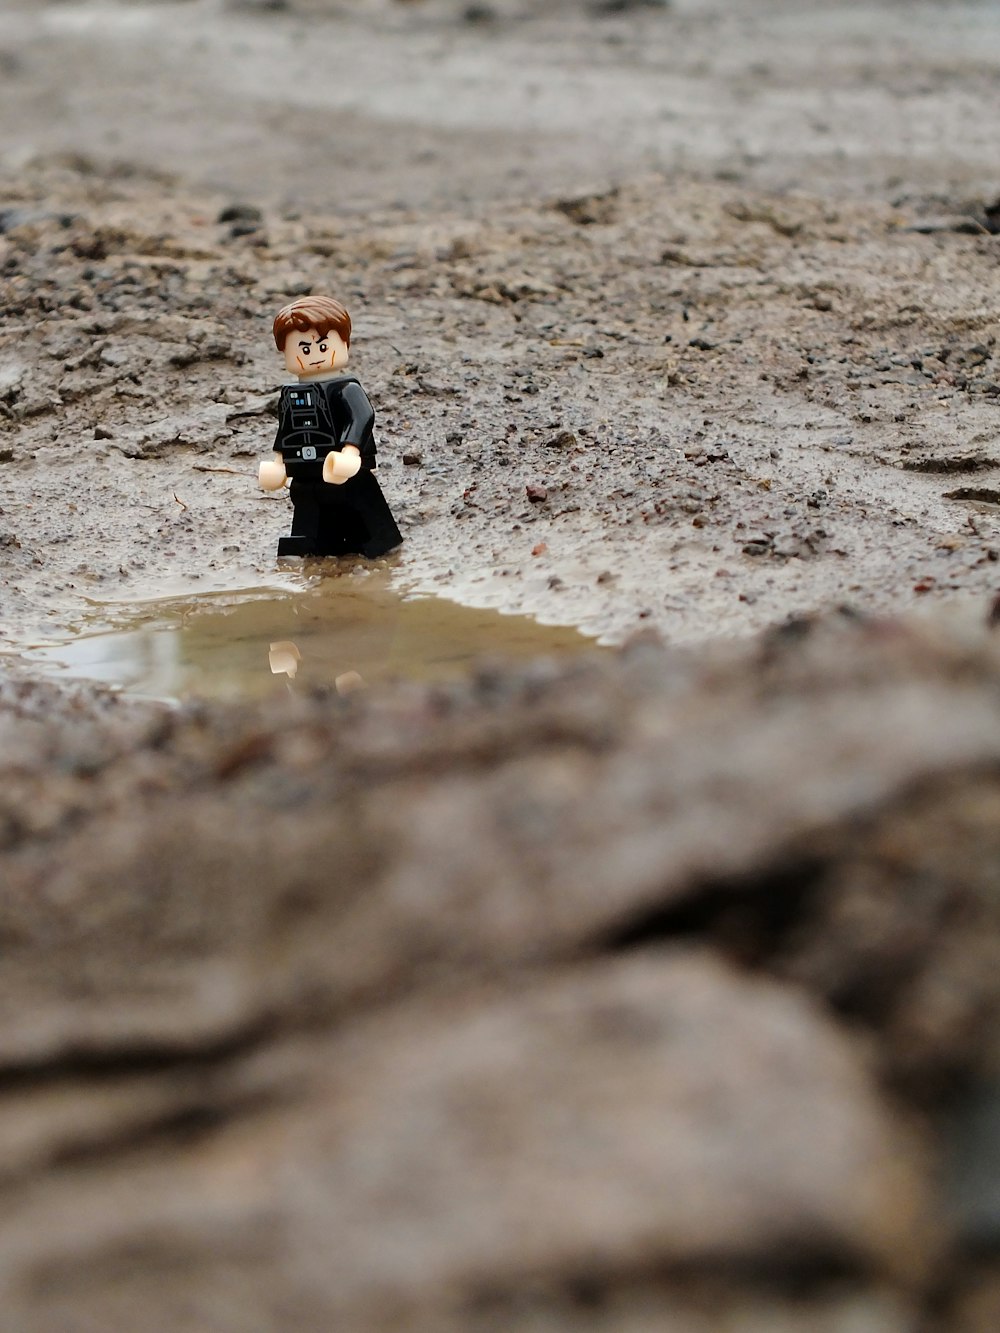 a lego man standing in a puddle of water